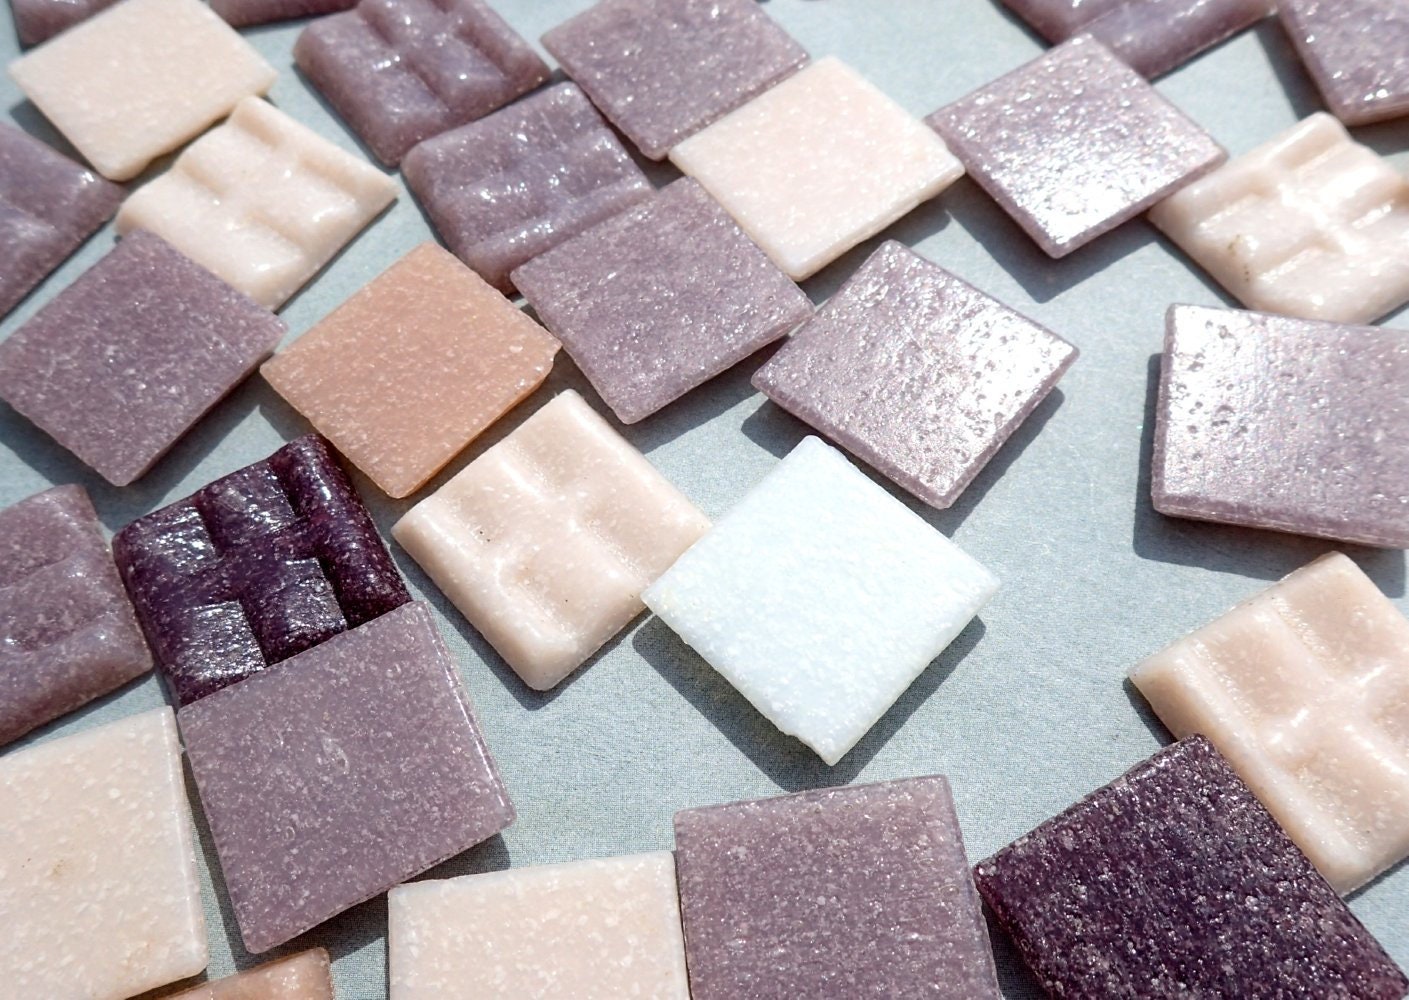 Pink and Purple Mix Glass Mosaic Tiles Squares - 20mm - Half Pound of Vitreous Glass Tiles